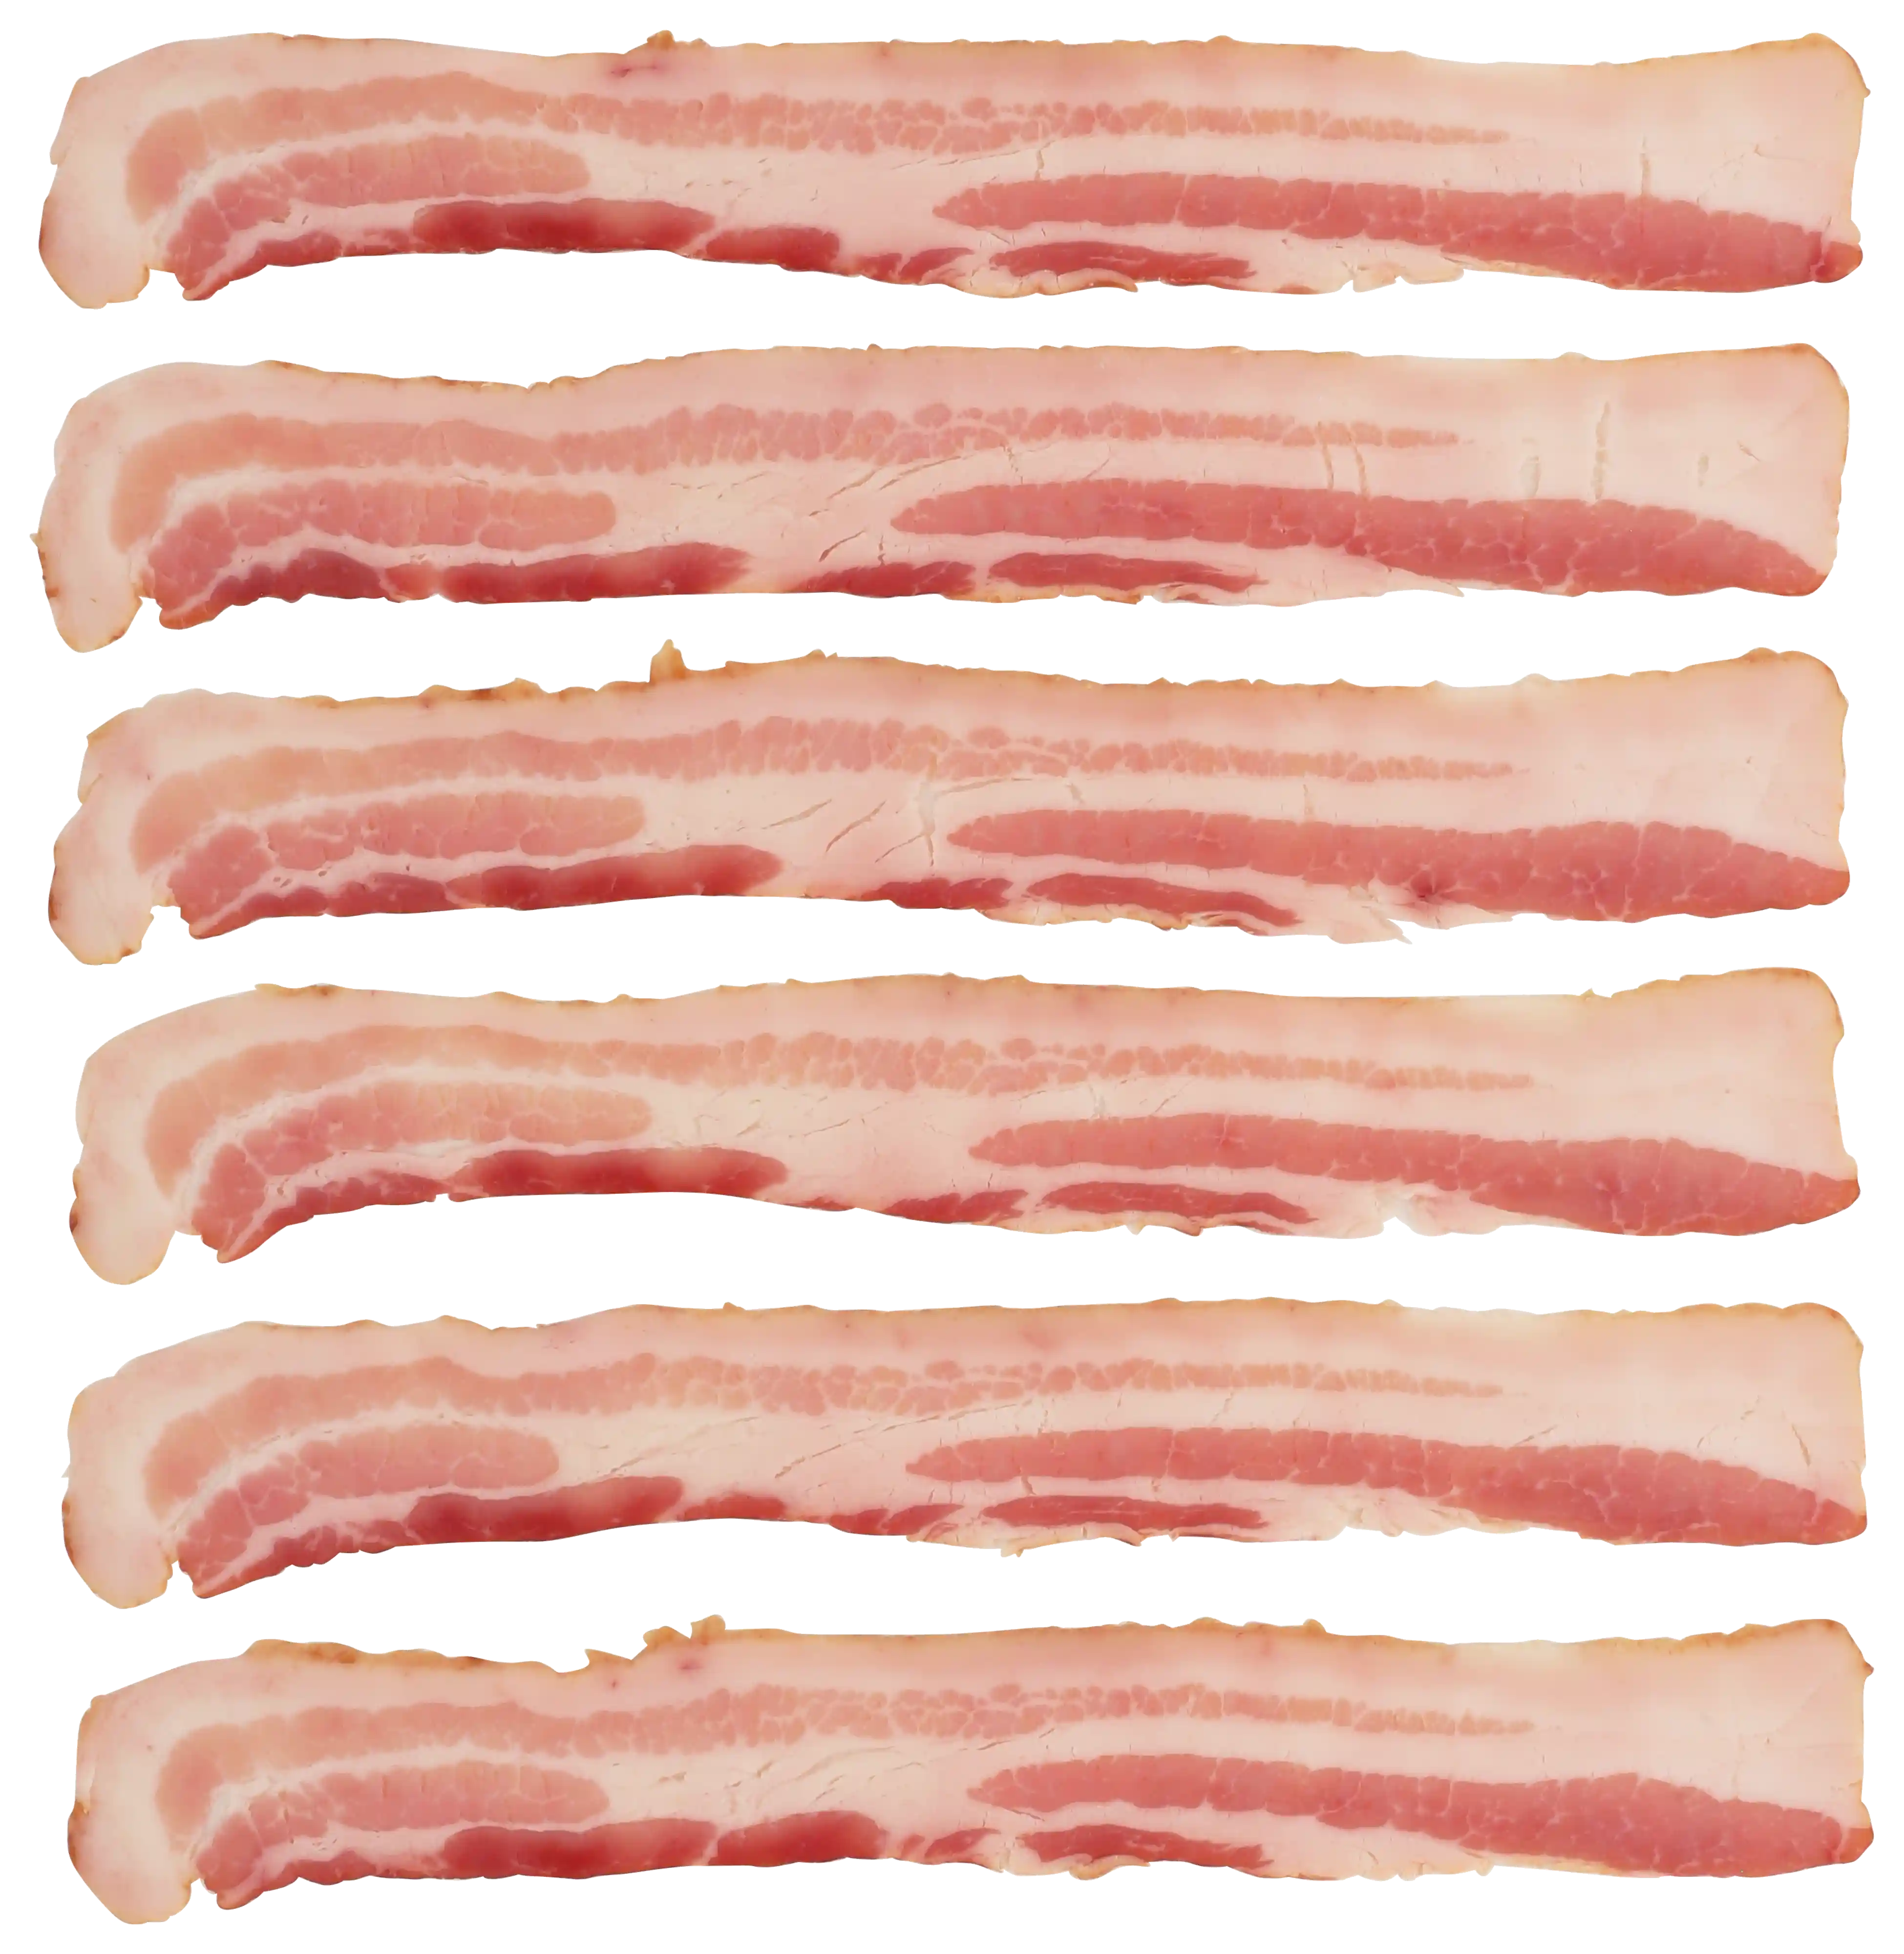 Wright® Brand Naturally Hickory Smoked Regular Sliced Bacon, Bulk, 15Lbs, 14-18 slices per pound, gas flushed_image_21